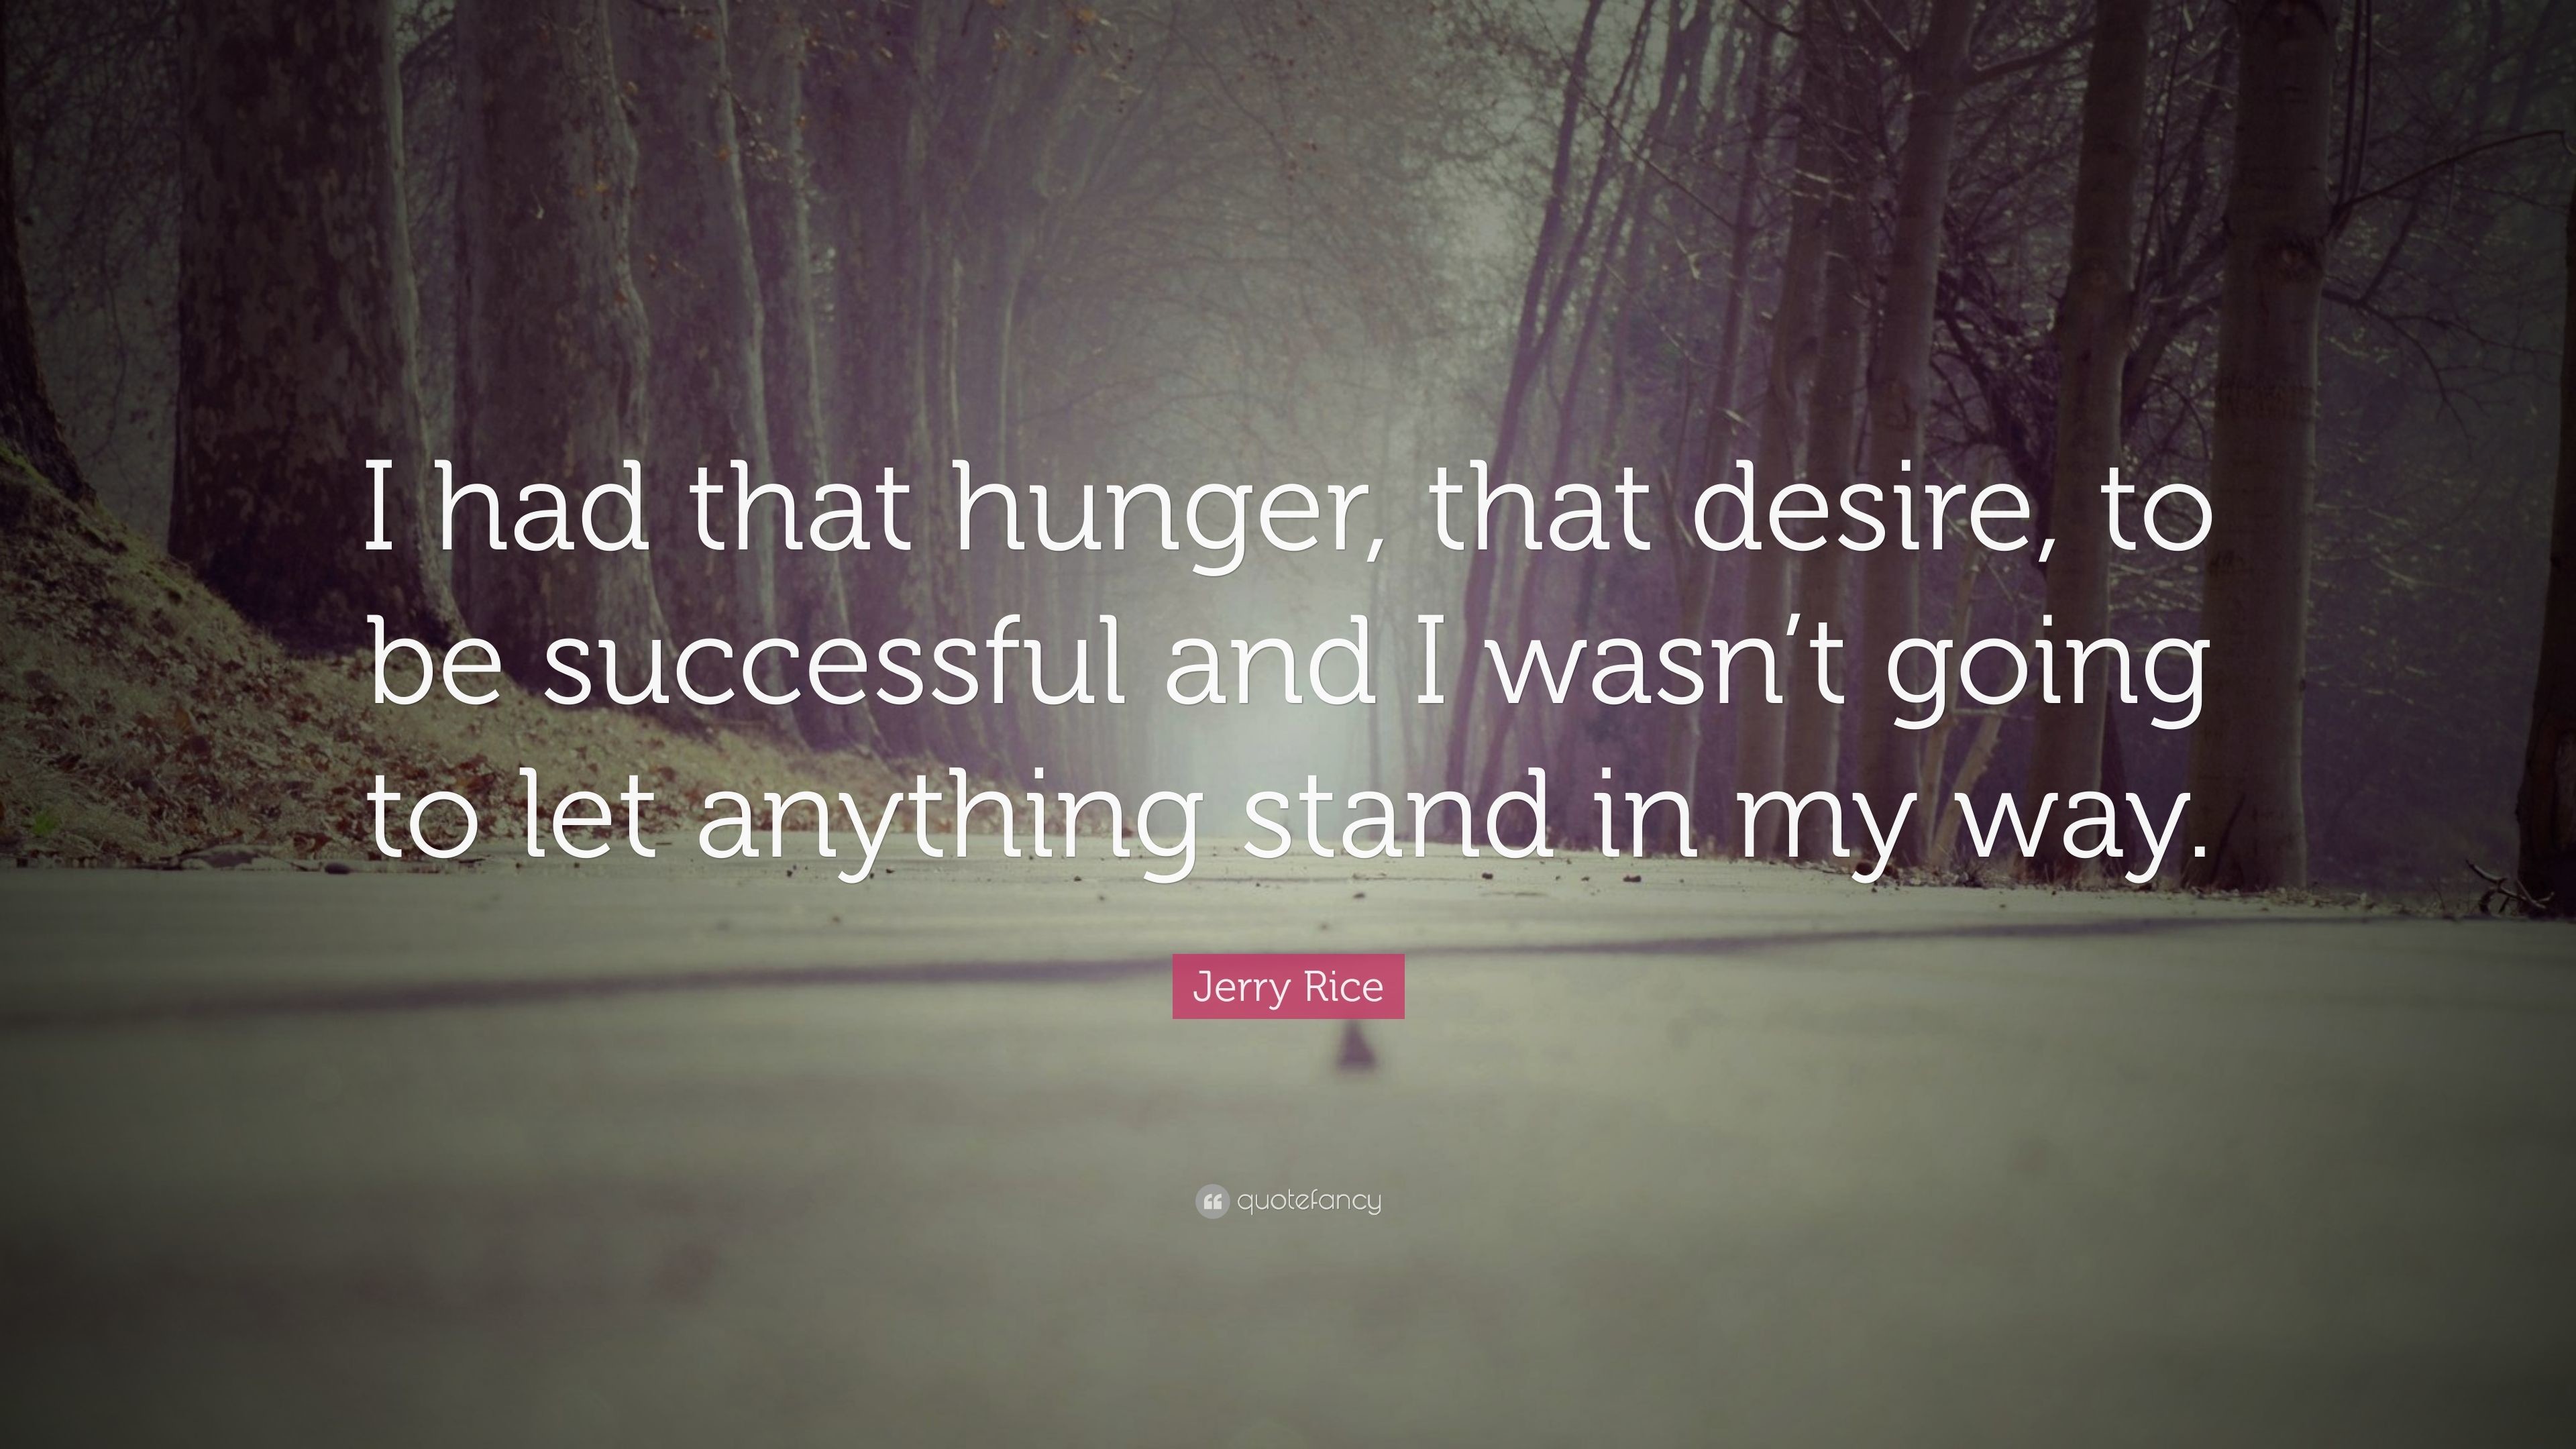 3840x2160 Jerry Rice Quote: “I had that hunger, that desire, to be successful